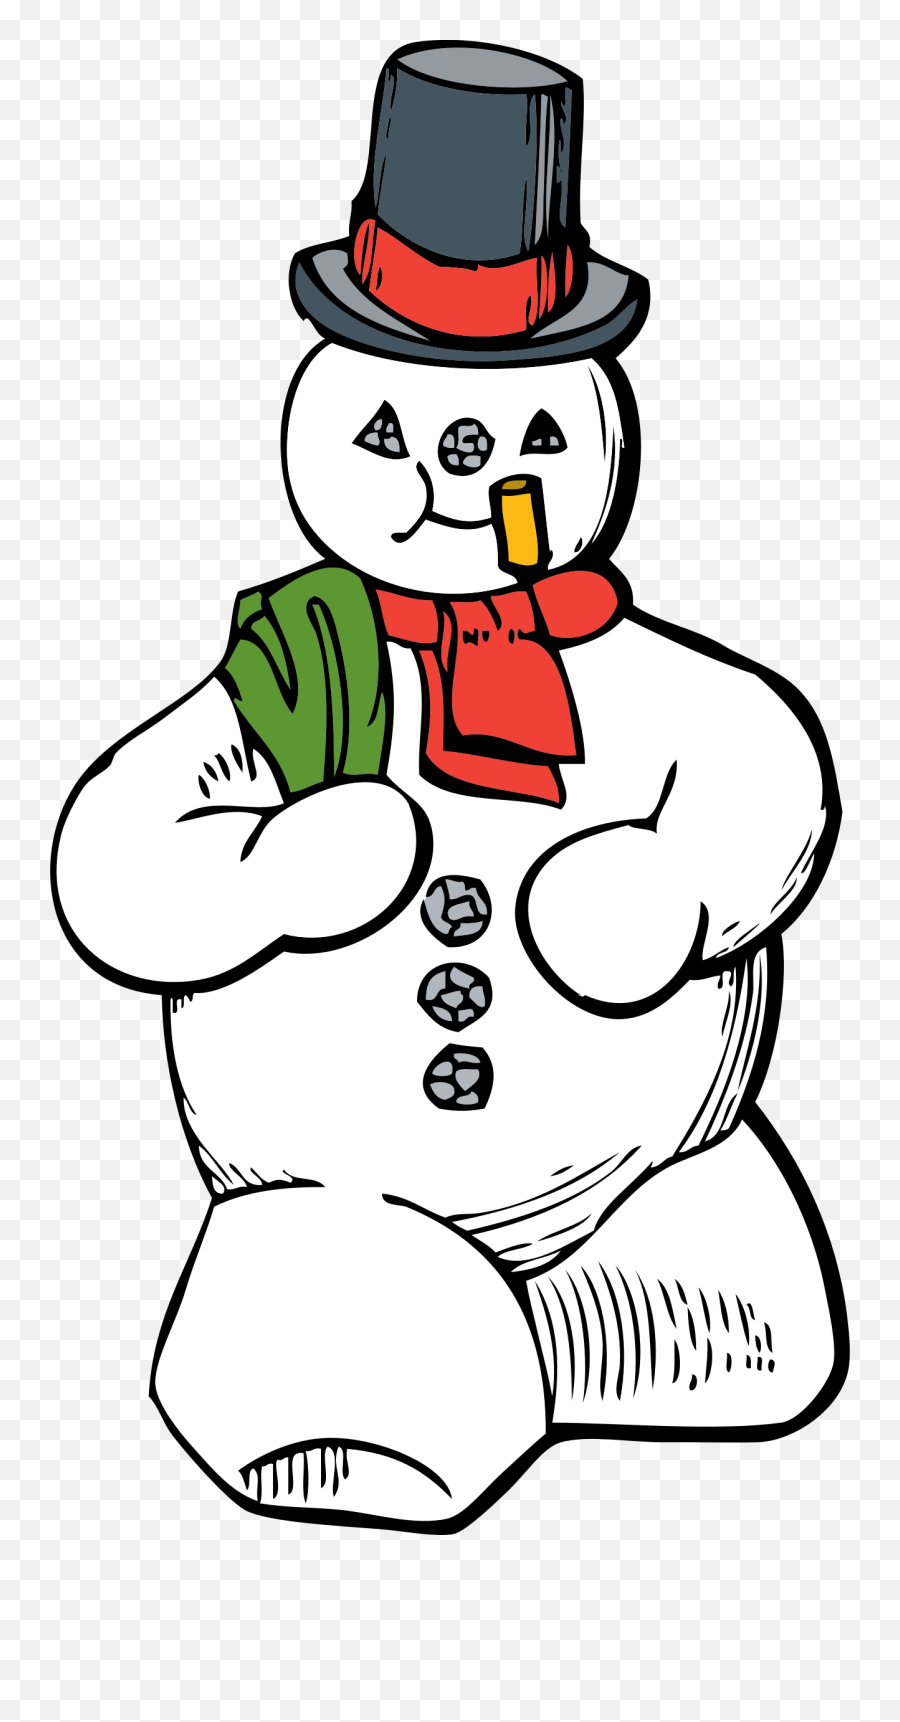 Animated Snowman Pictures - Clipart Best Animated Winter Clipart Emoji,Snowmen Clipart